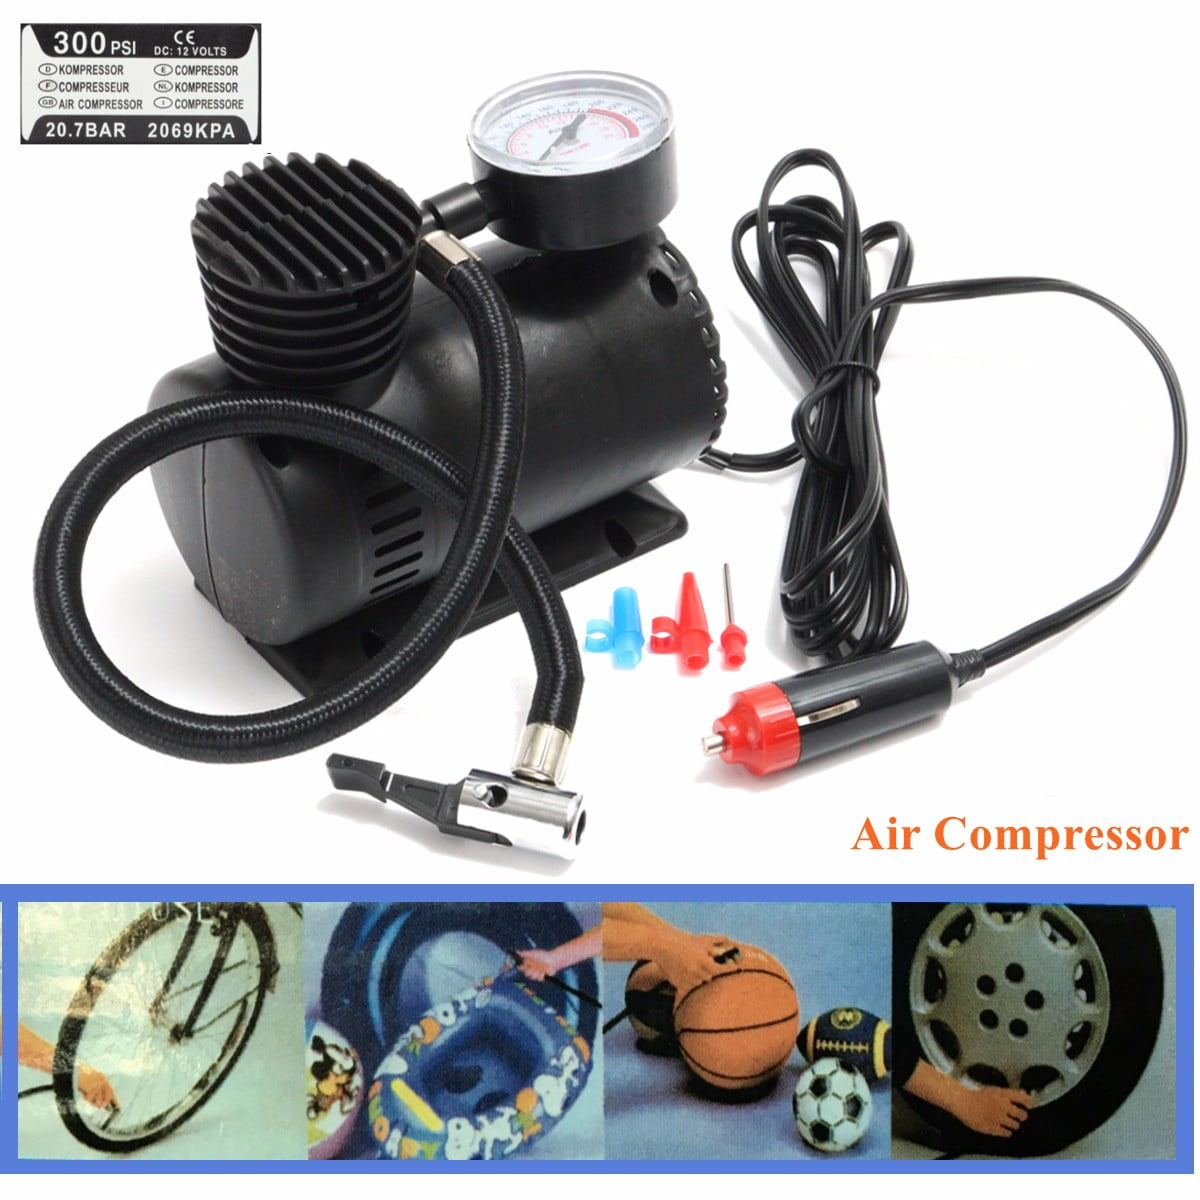 VXDAS Car Tire Inflator,Portable Air Compressor Pump 12V DC Auto Digital Tire Pump 150 PSI Pressure Gauge with LED Light for Car Bicycle Balls Swimming Rings Toy 